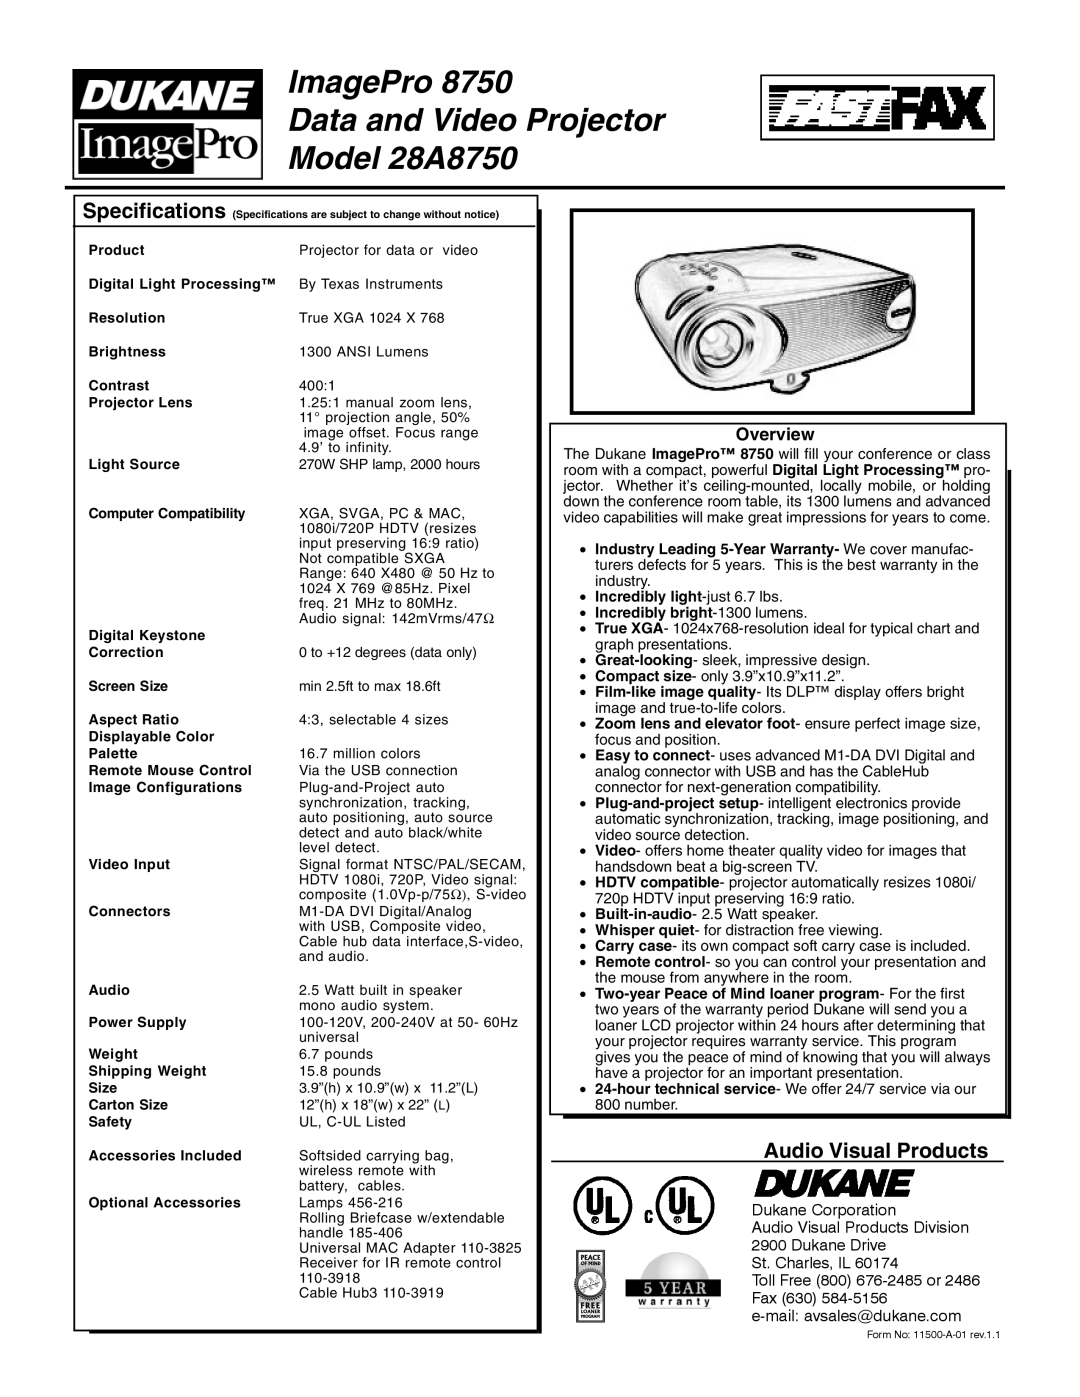 Dukane specifications ImagePro Data and Video Projector Model 28A8750, Audio Visual Products, Overview 